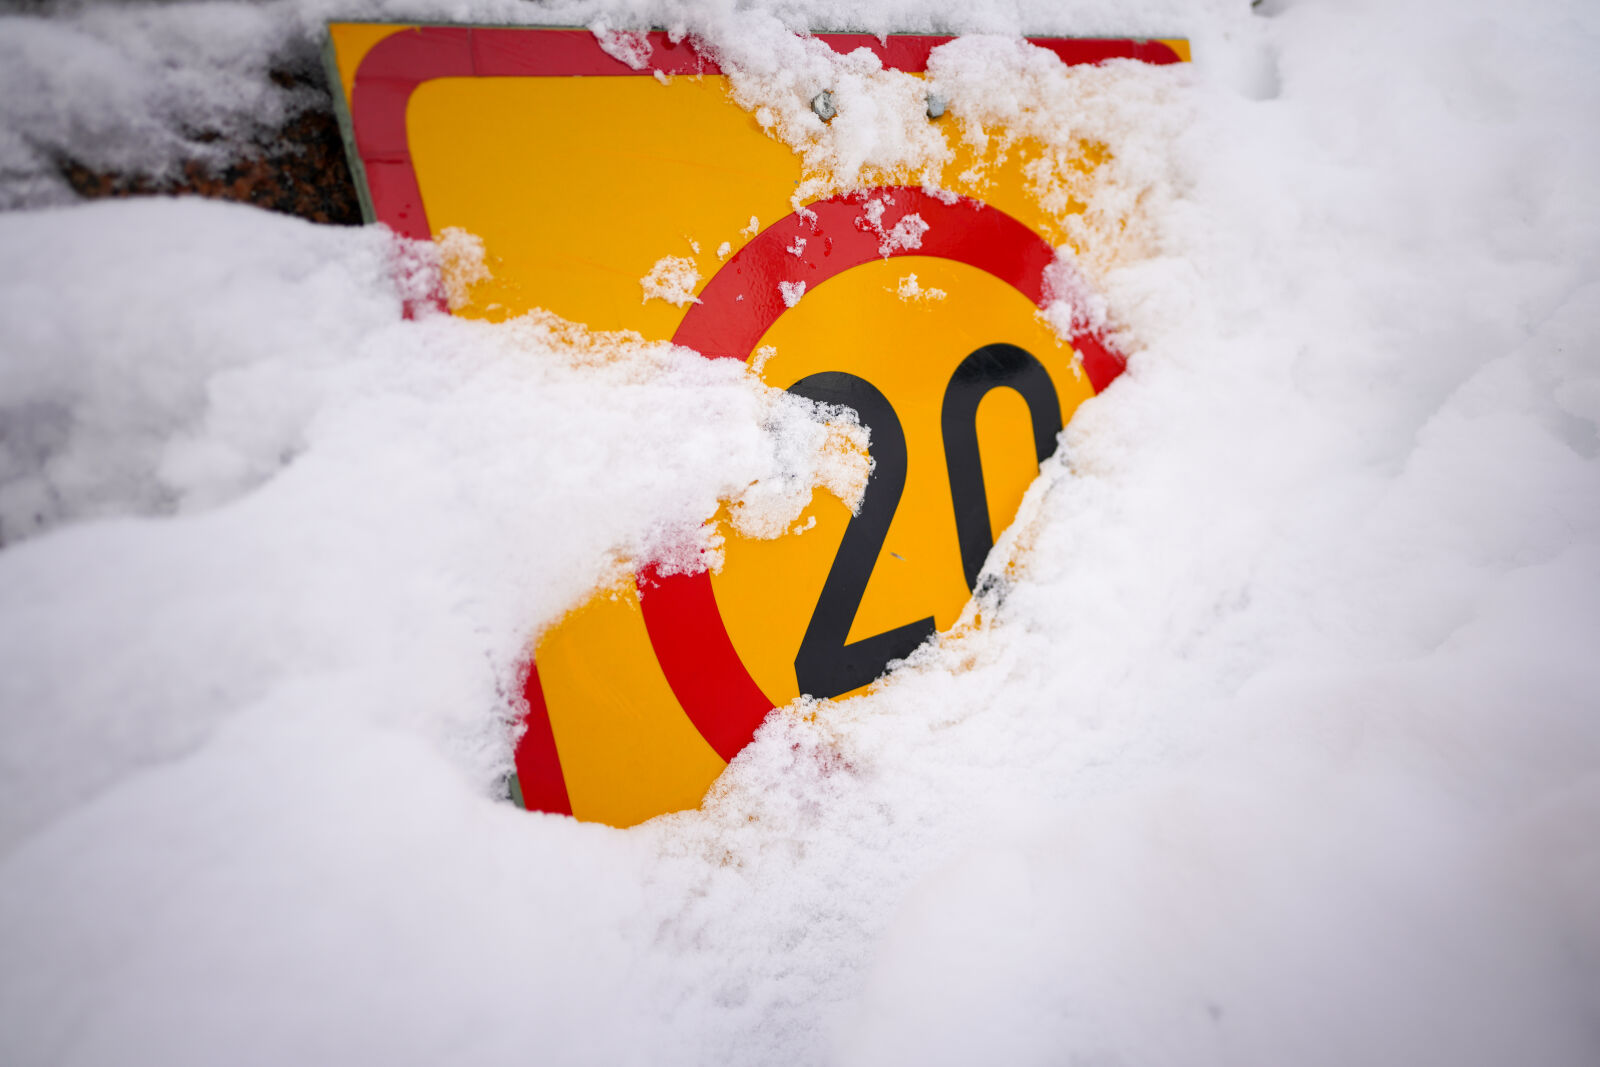 Sony a7R IV + Sigma 20mm F2.0 DG DN | C sample photo. Speed limit for snow photography